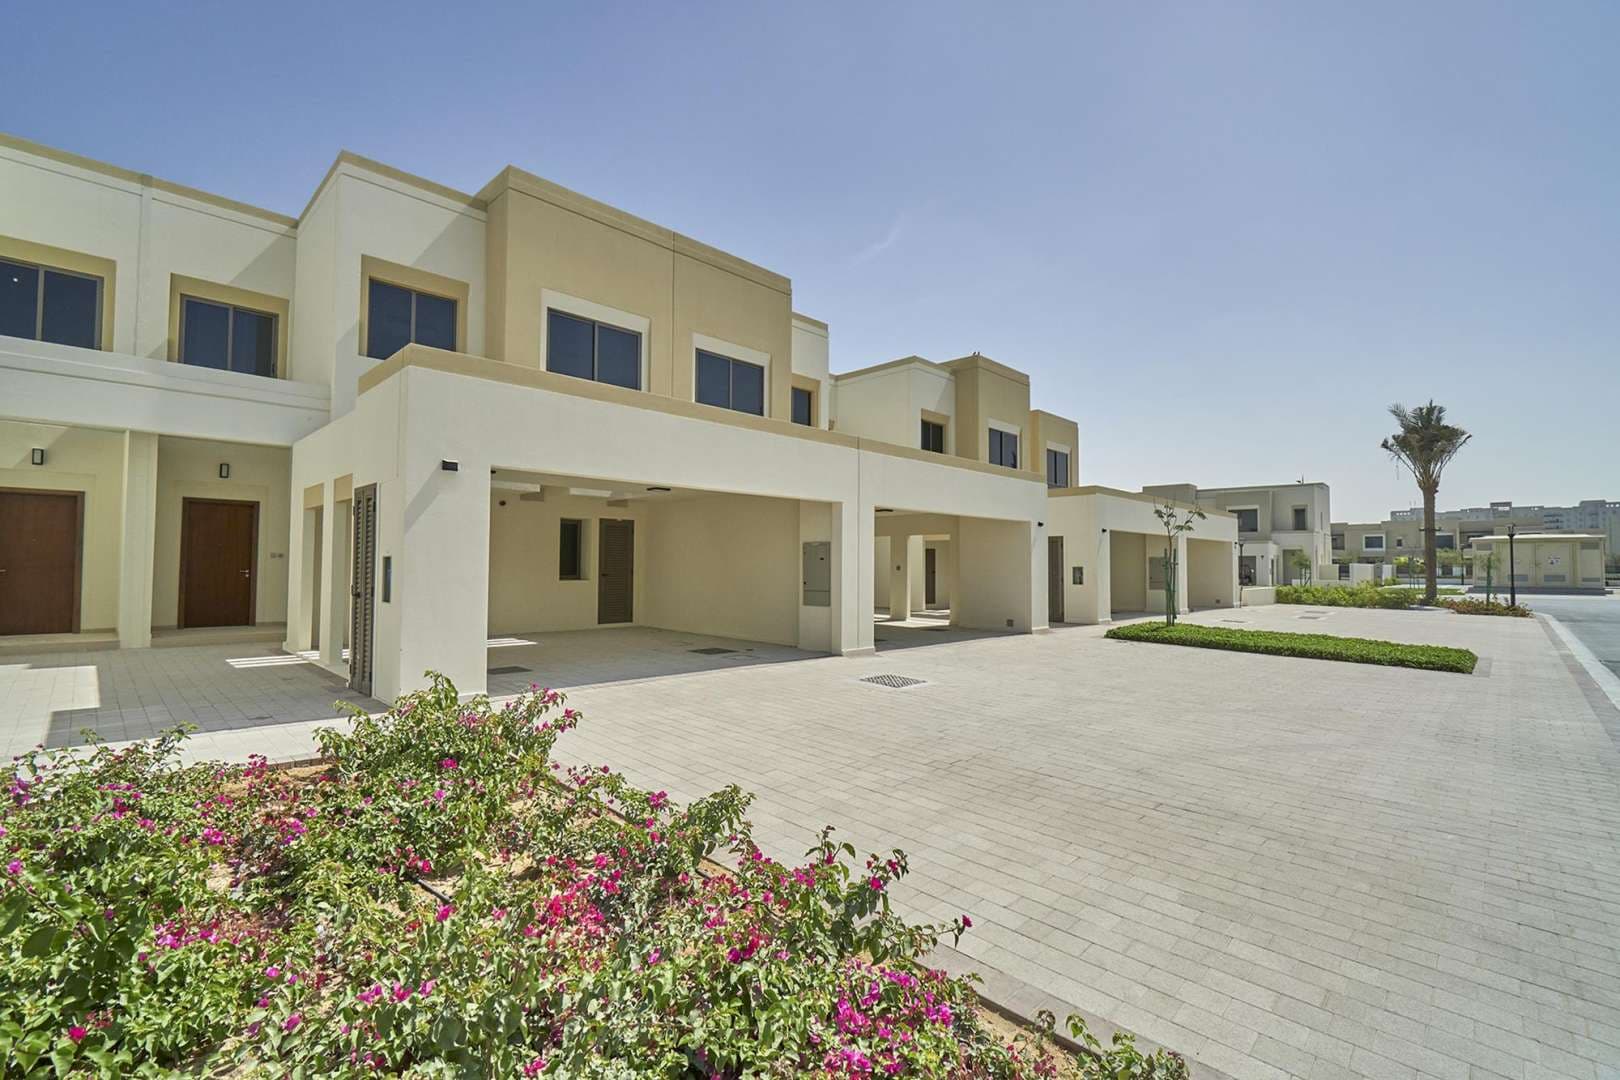 3 Bedroom Townhouse For Rent Naseem Townhouses Lp06273 Bf9f9696860db80.jpg